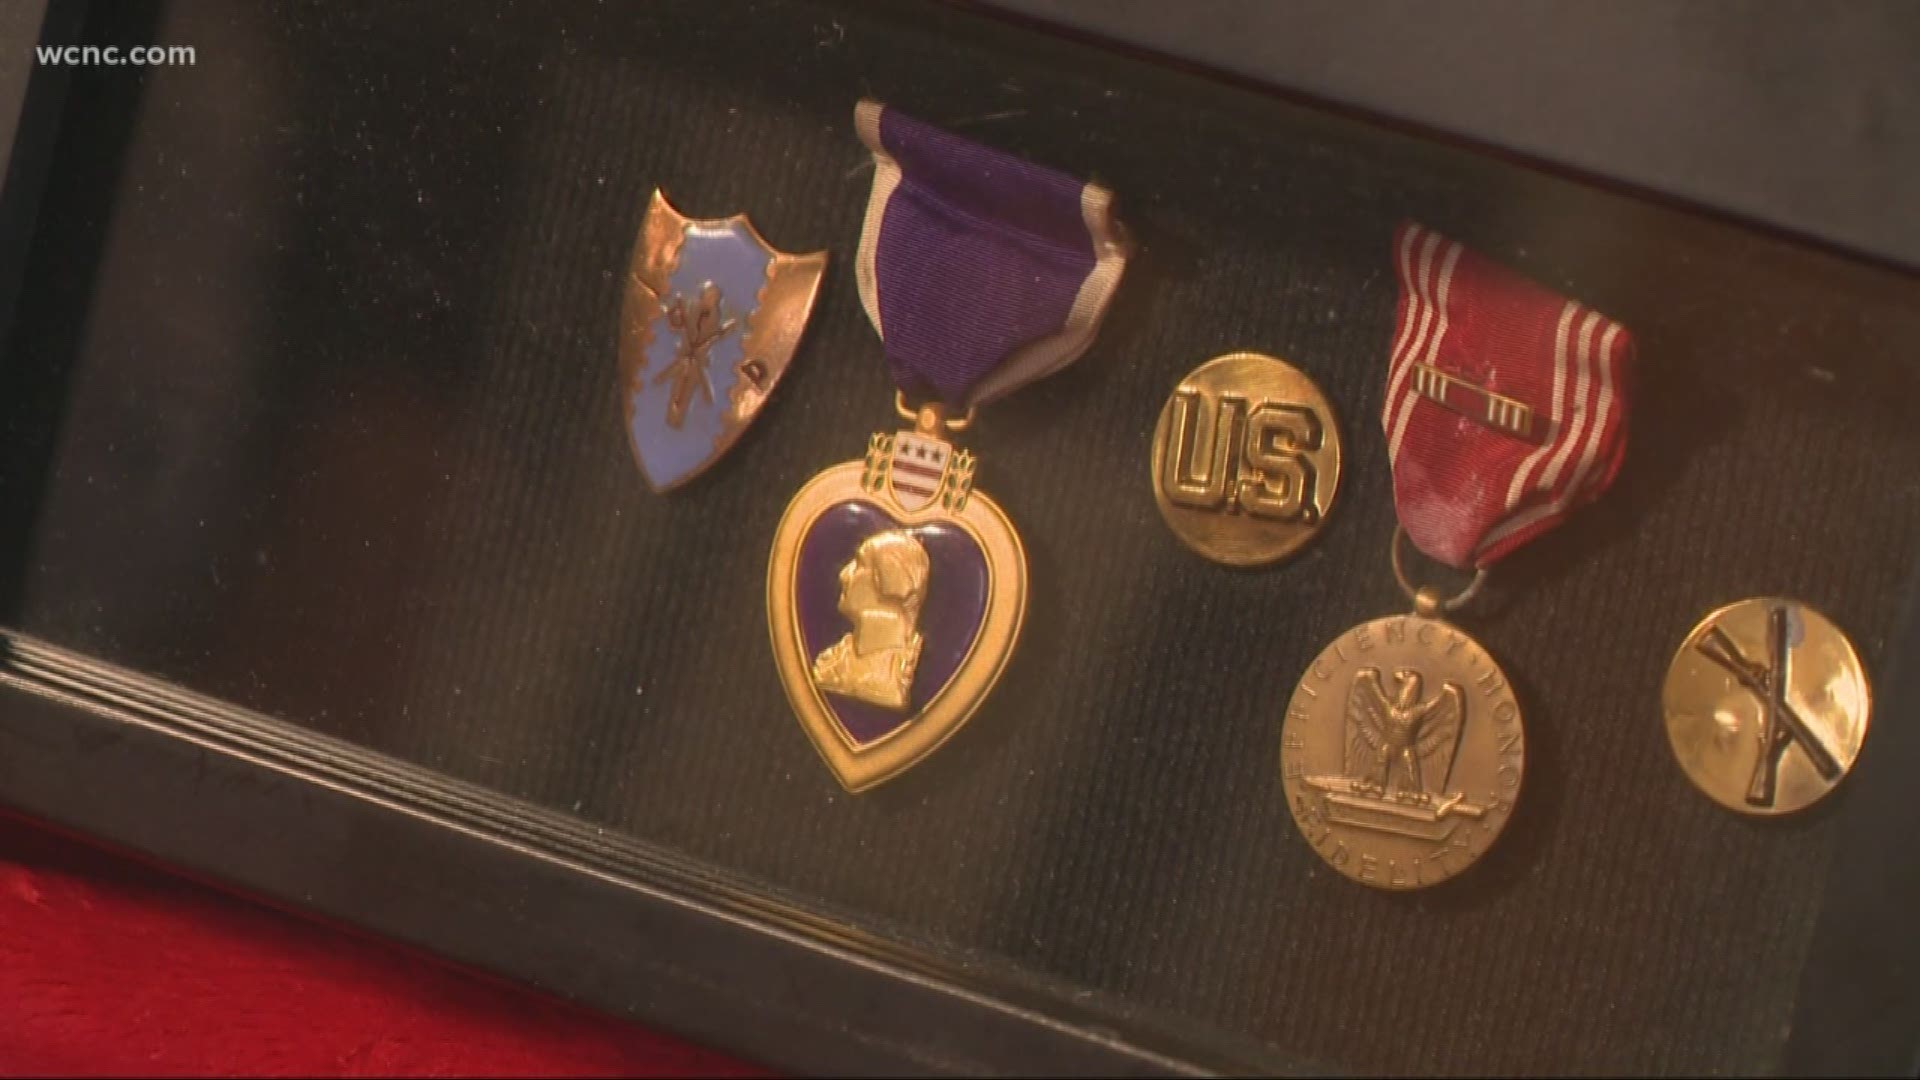 A couple in Statesville uncovered a family treasure they knew nothing about. Now, they're hoping to return it to its rightful owners.